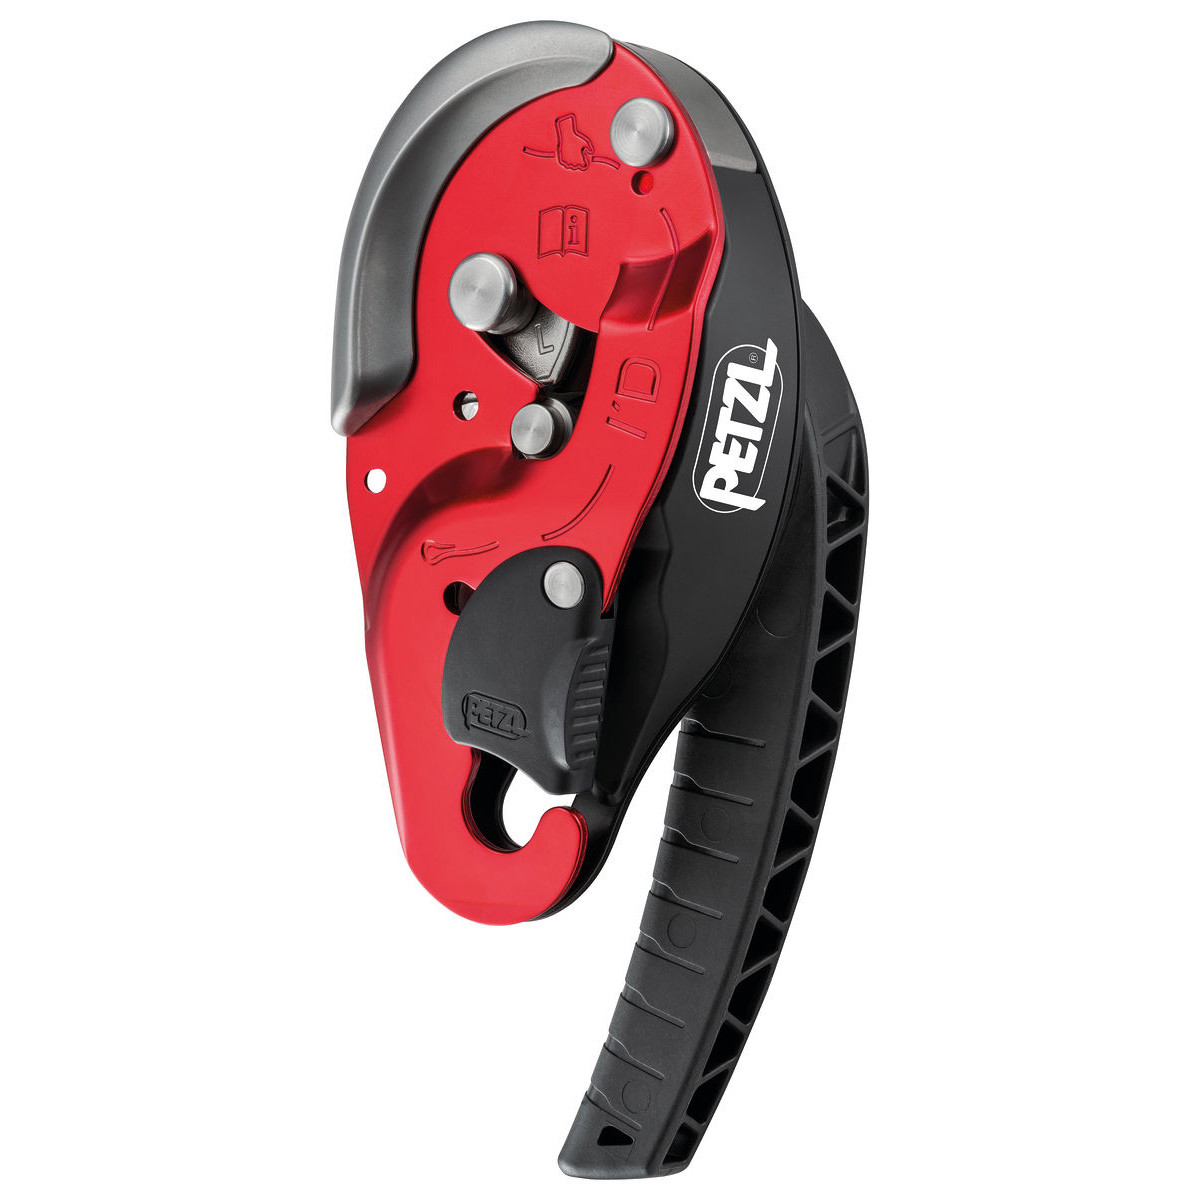 Petzl ID L Descender Self Braking Descender with Anti Panic Function for Rescue